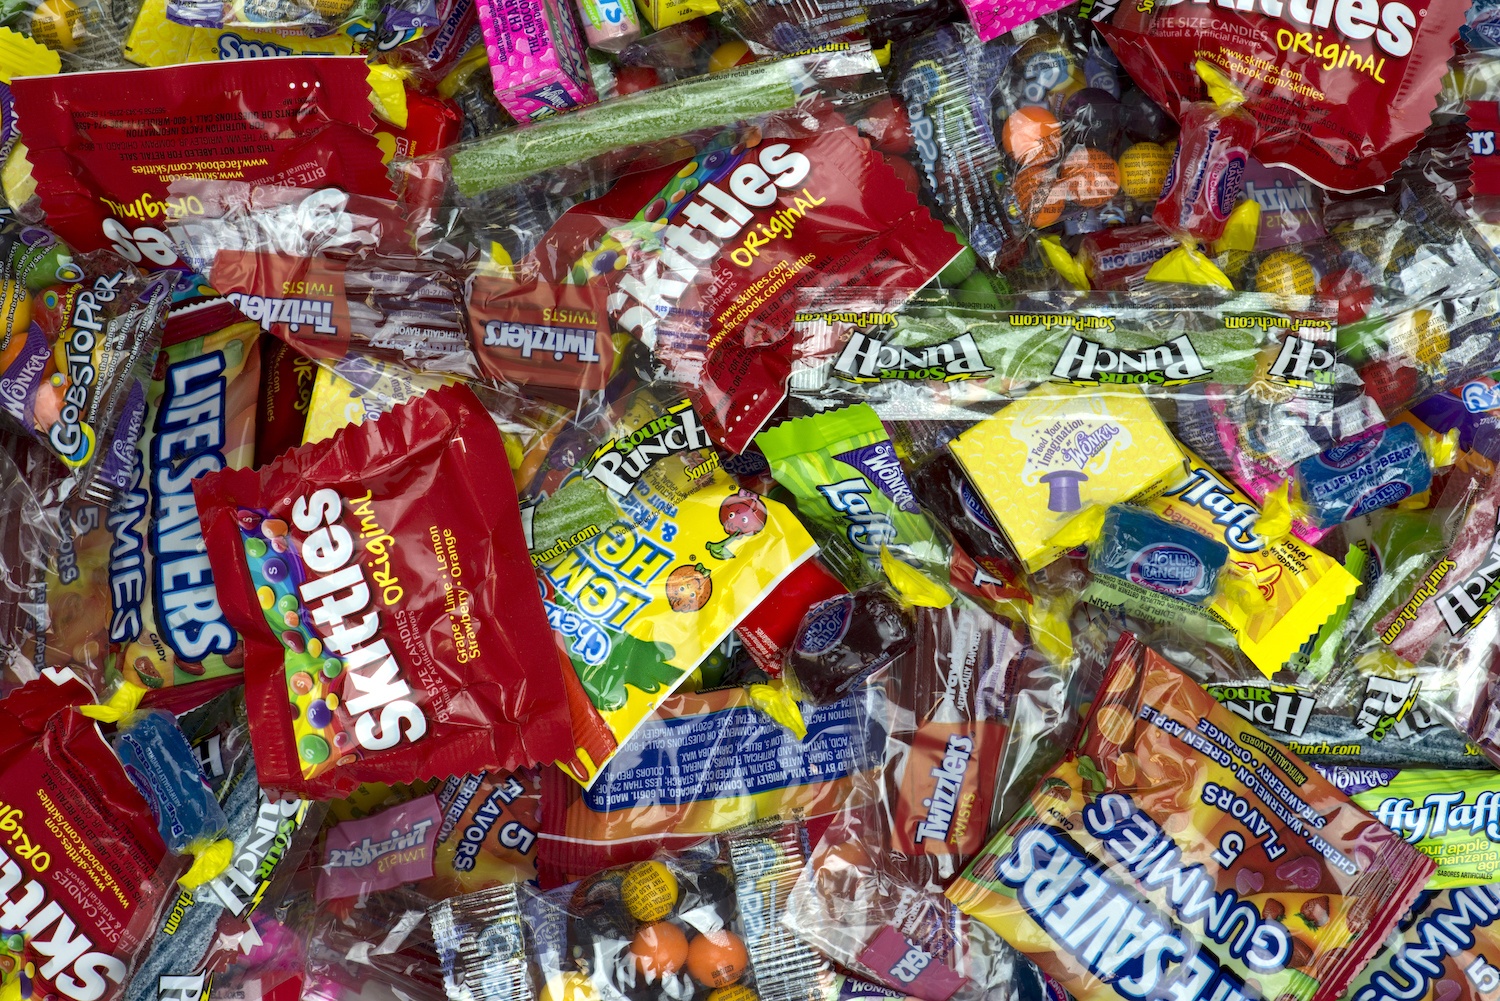 Large pile of sweet and sour candy wrappers. October 2020